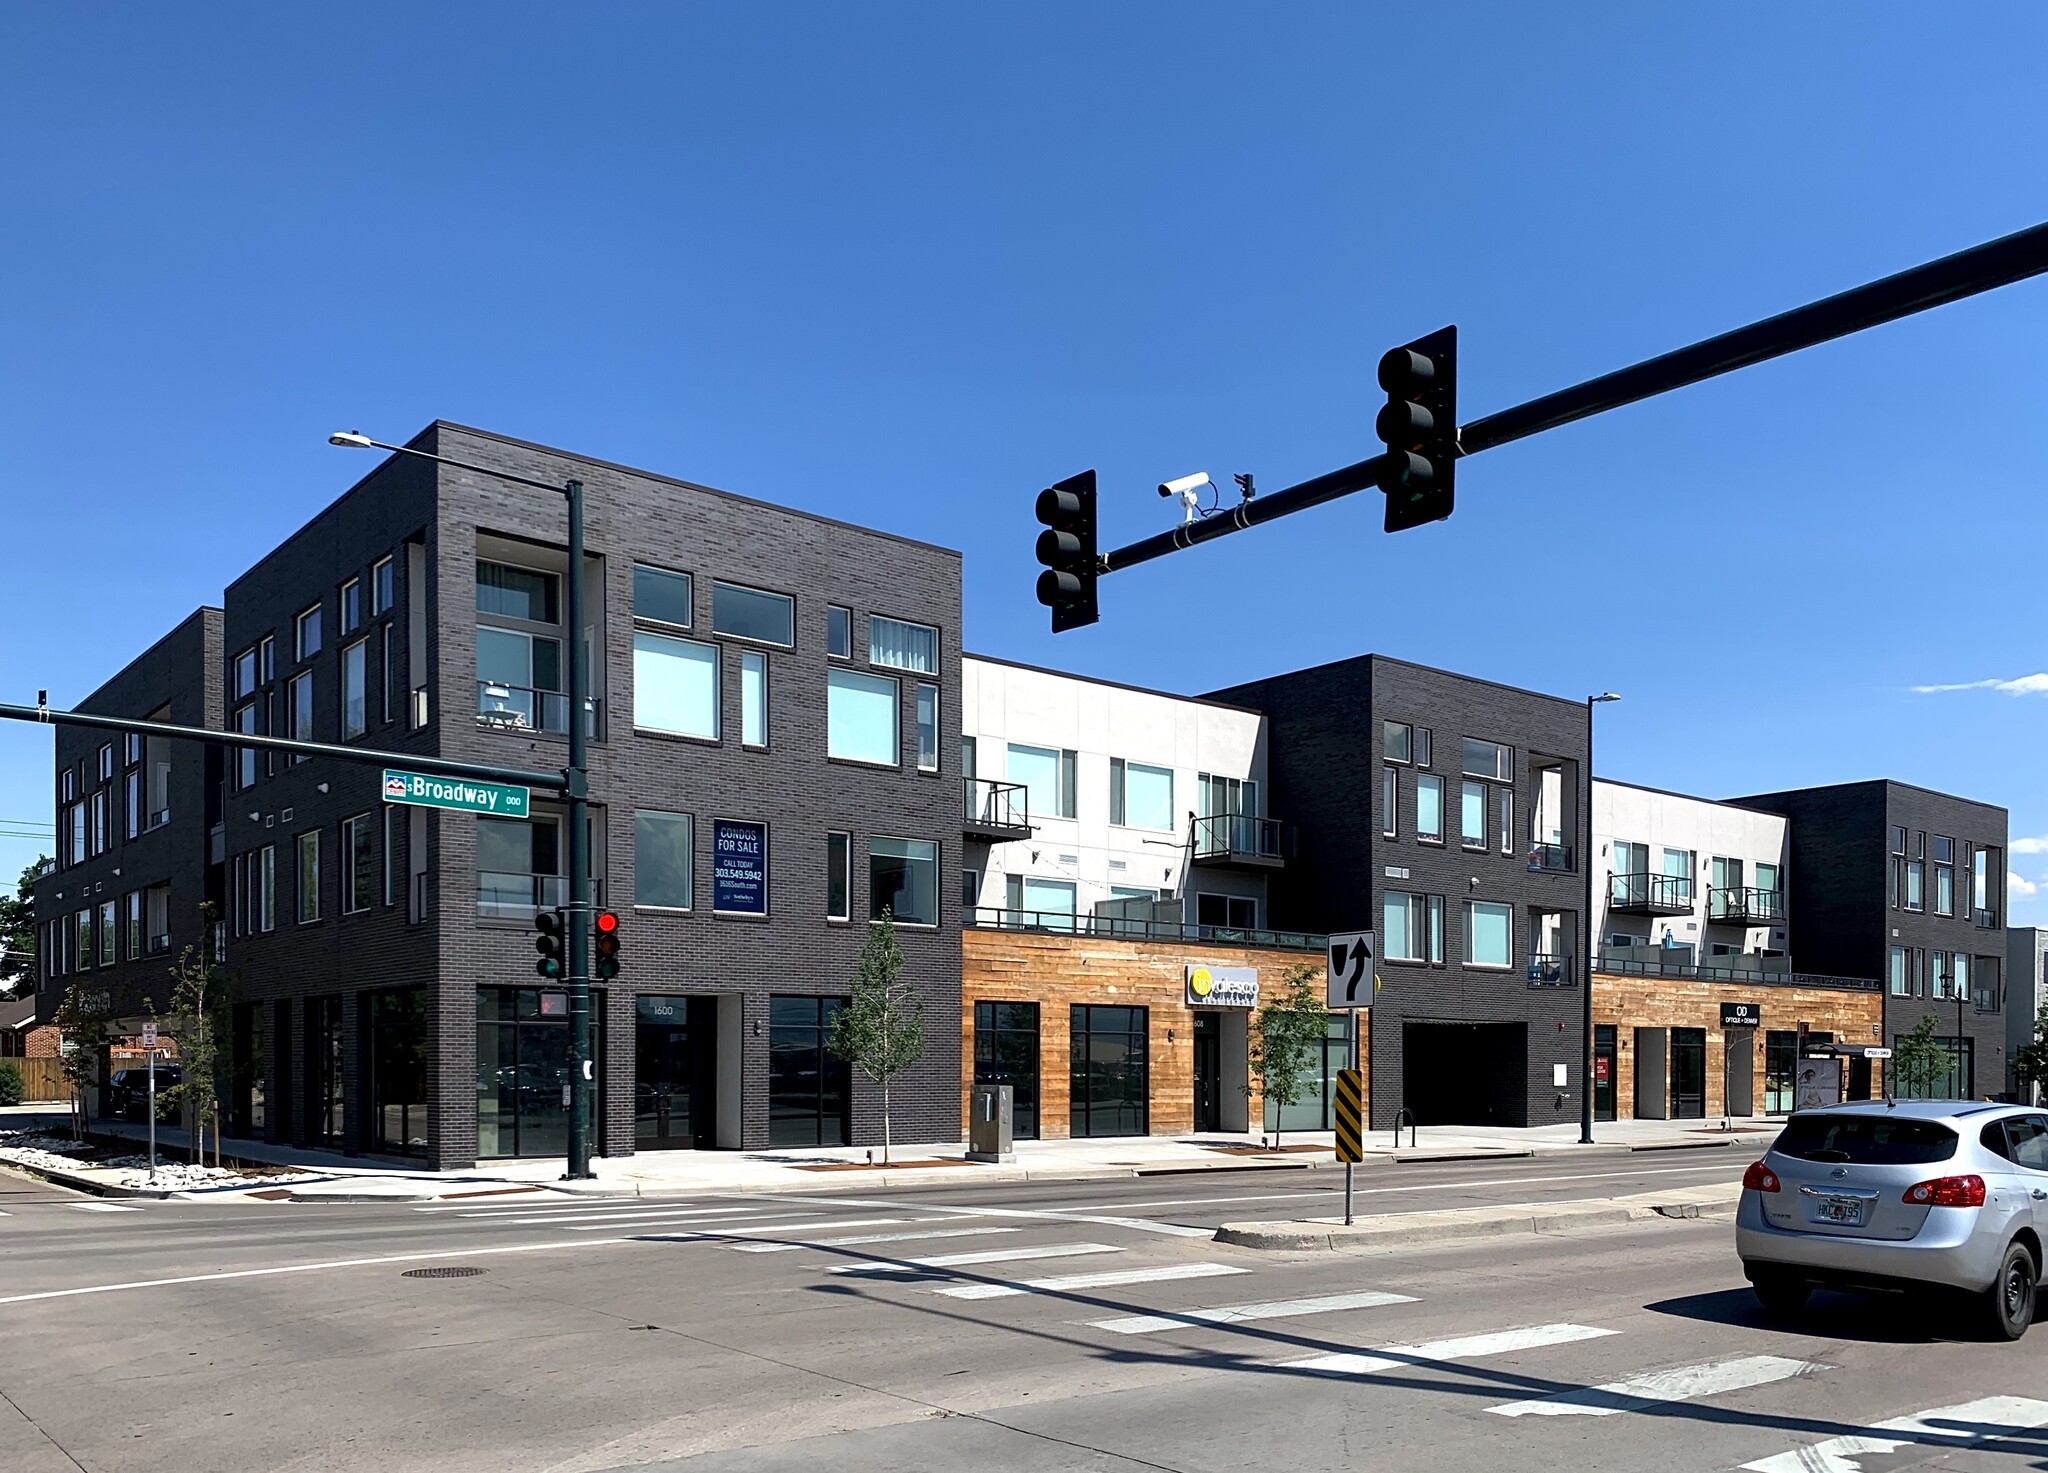 2,900 SF Retail Condo Sells for $975,000